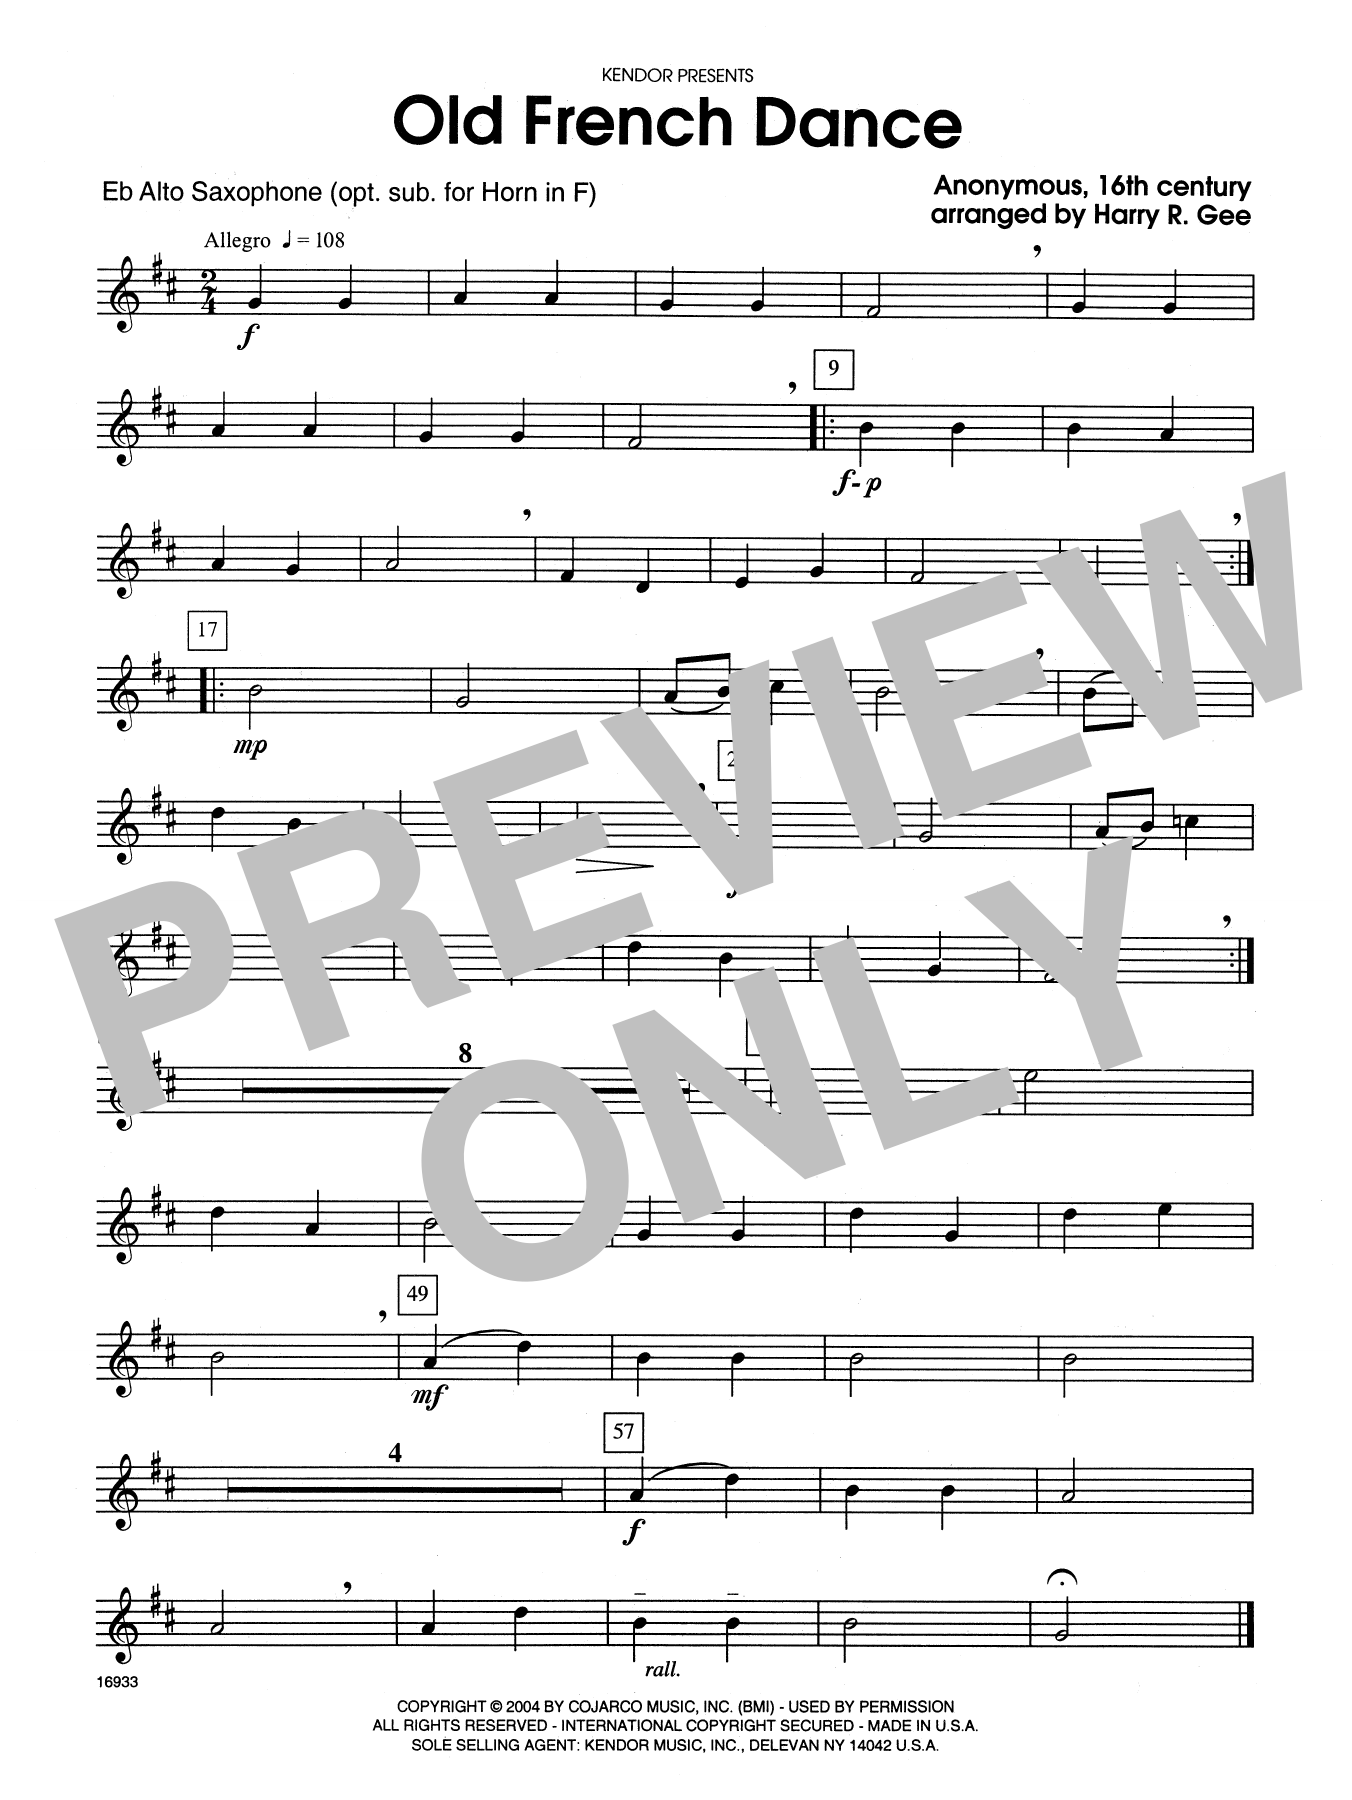 Download Harry R. Gee Old French Dance - Opt. Alto Sax Sheet Music